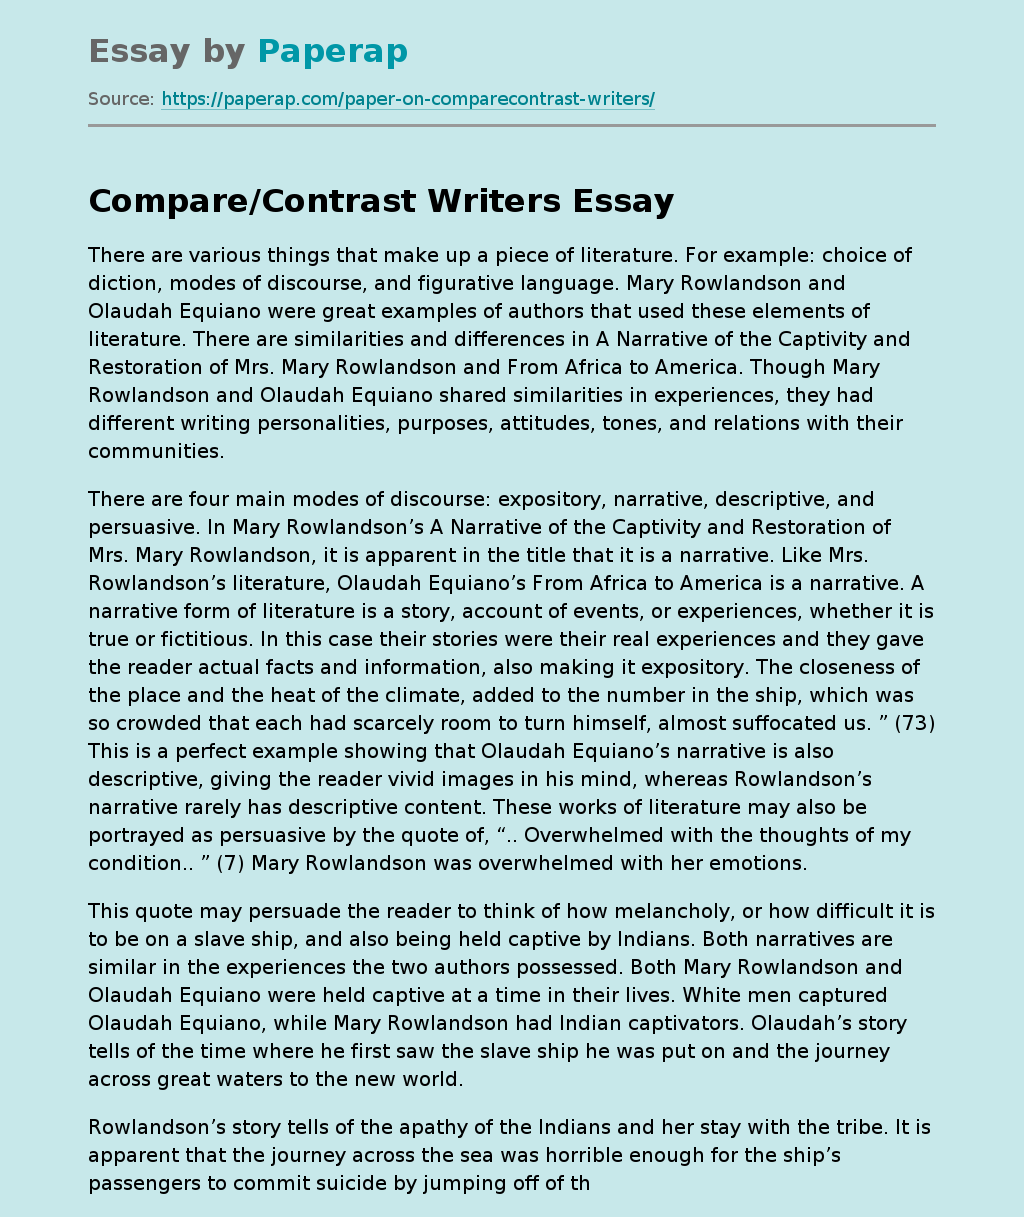 Compare/Contrast Writers